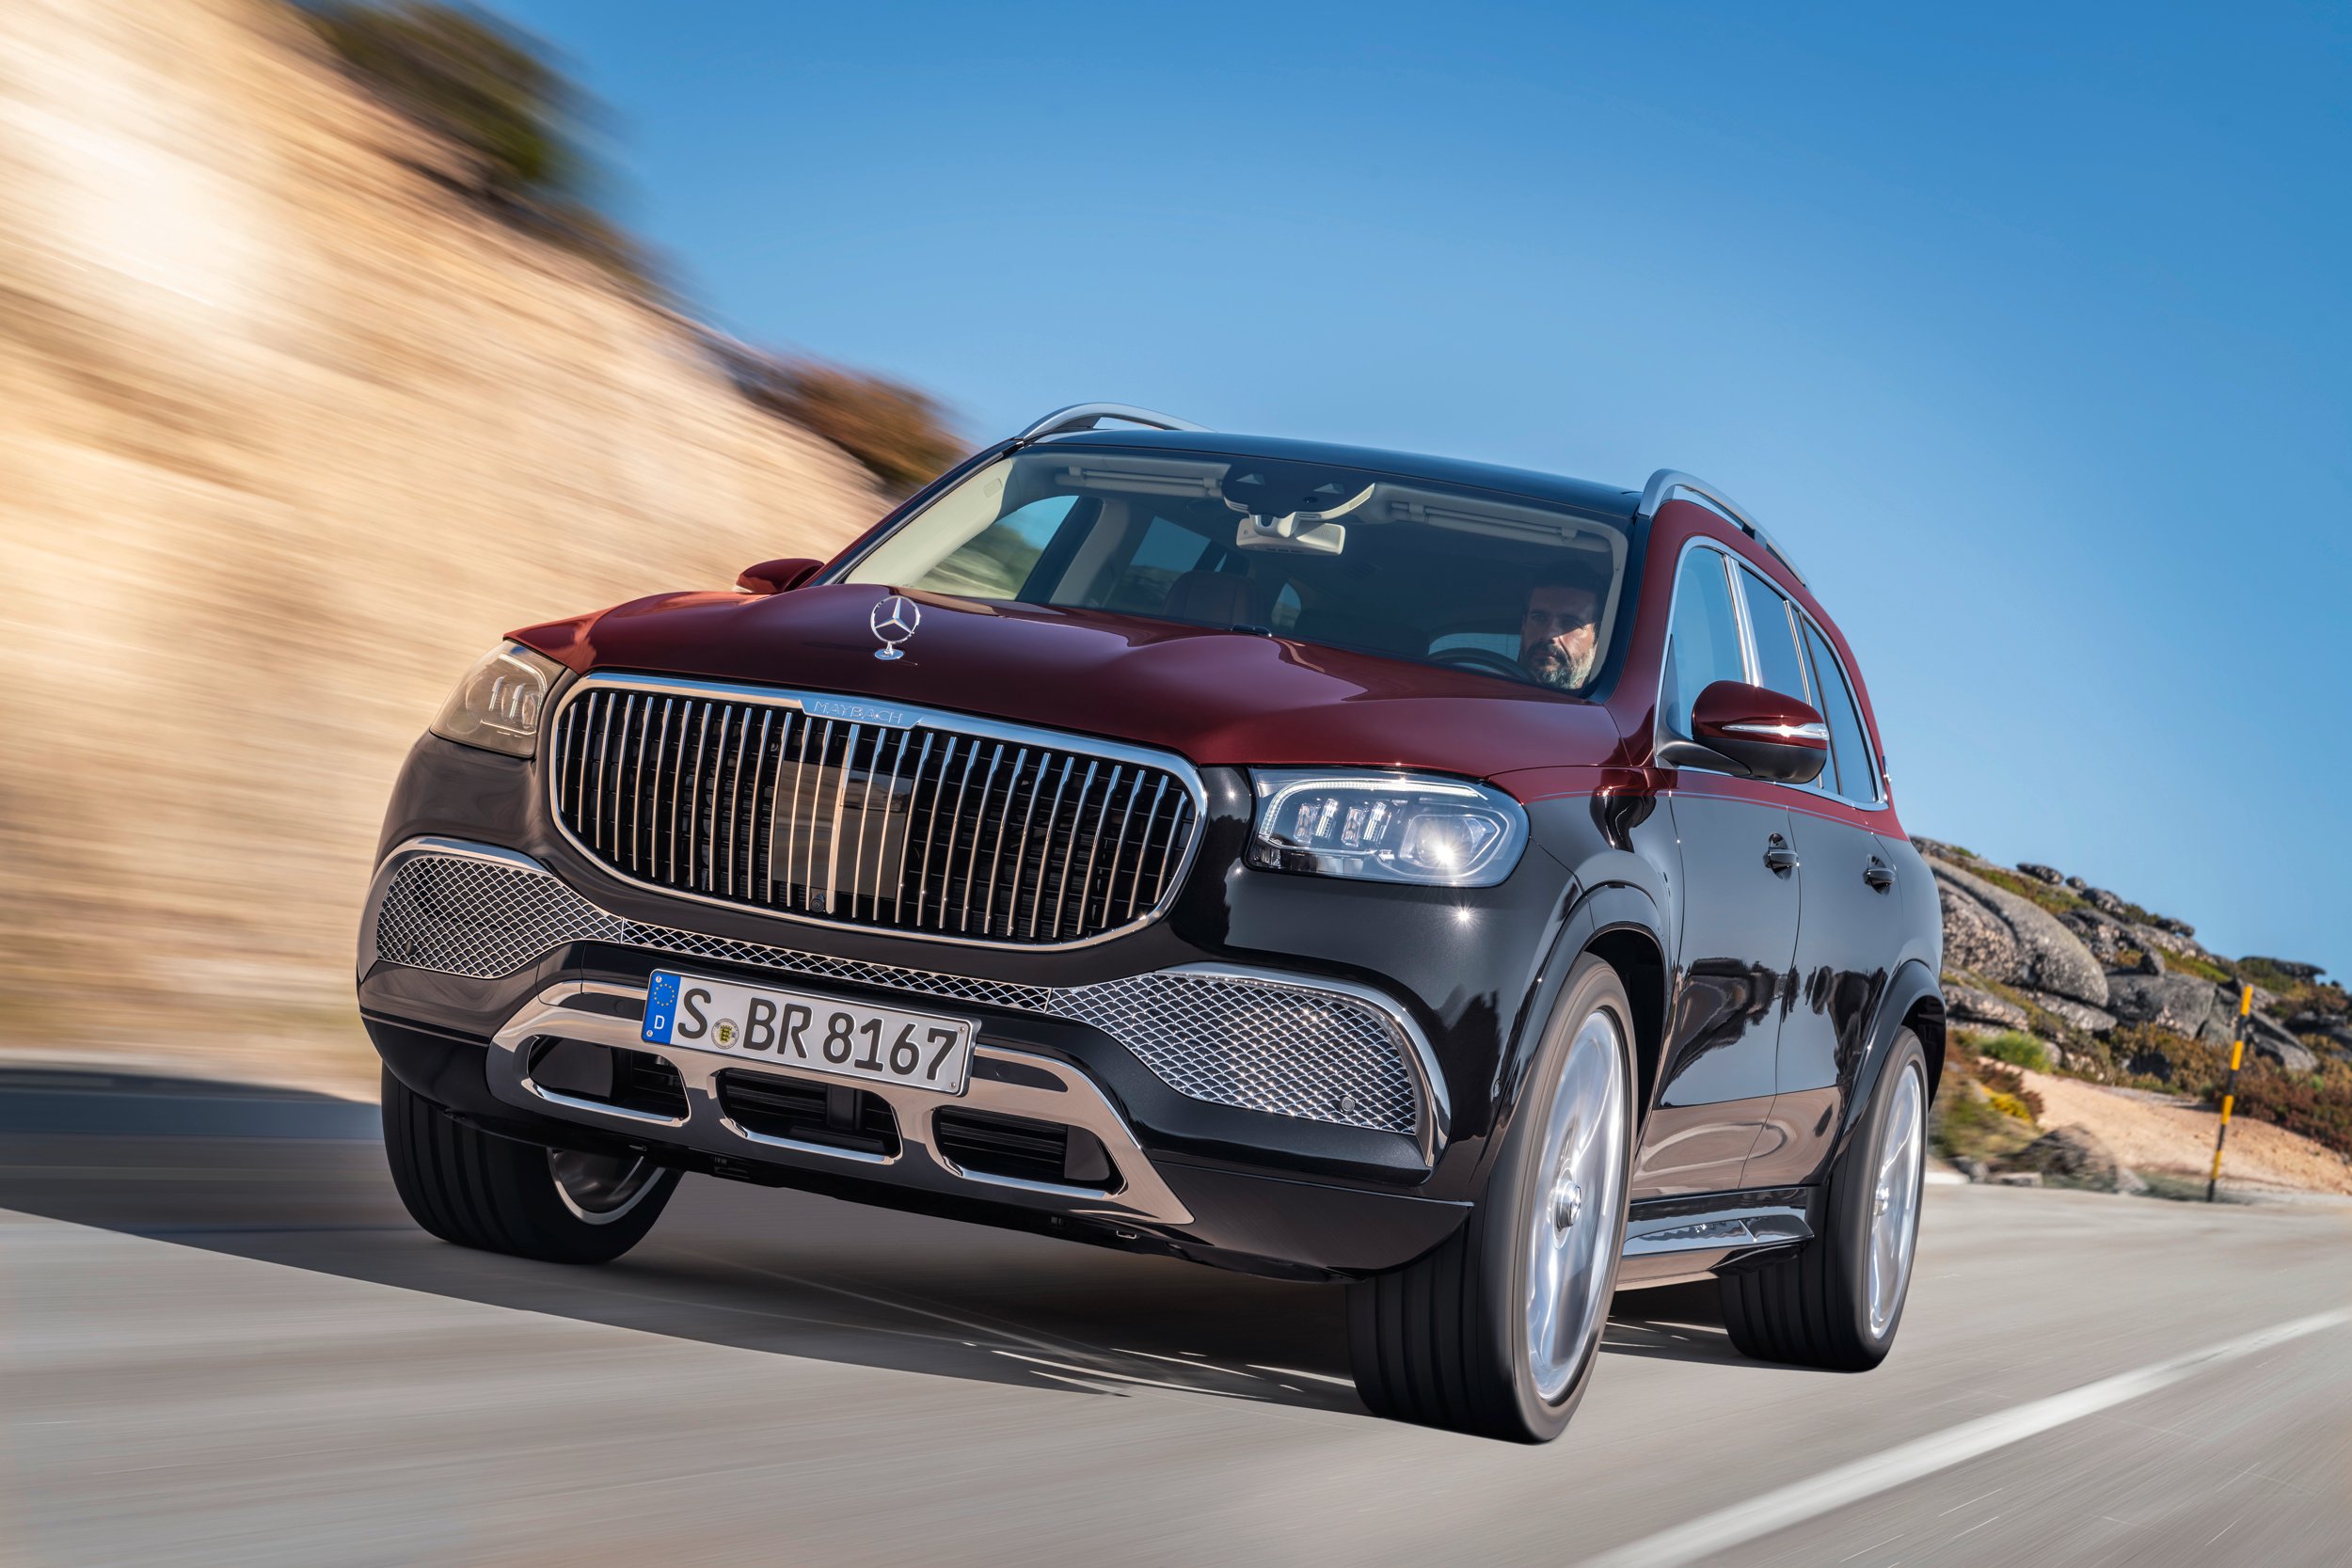 Mercedes Maybach GLS 600 4MATIC Photo Gallery